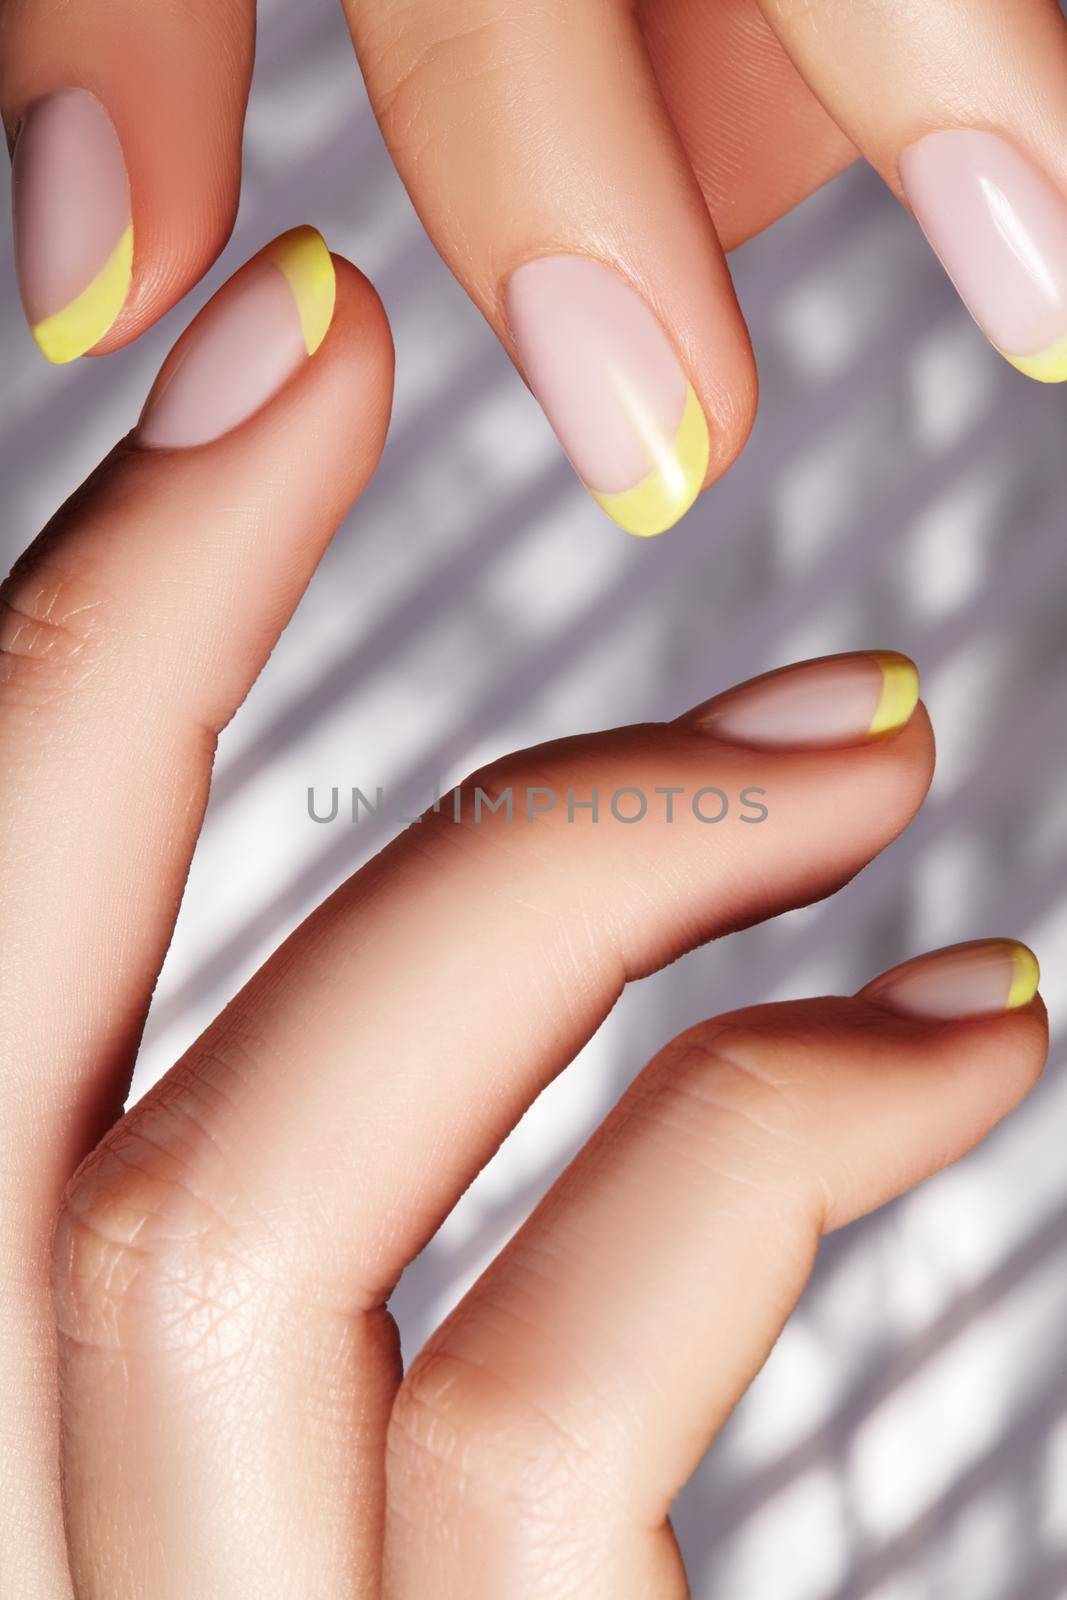 Hands with bright yellow french manicure on geometric background. Nails art design. Close-up of female hands with trendy neon nails on silver striped print